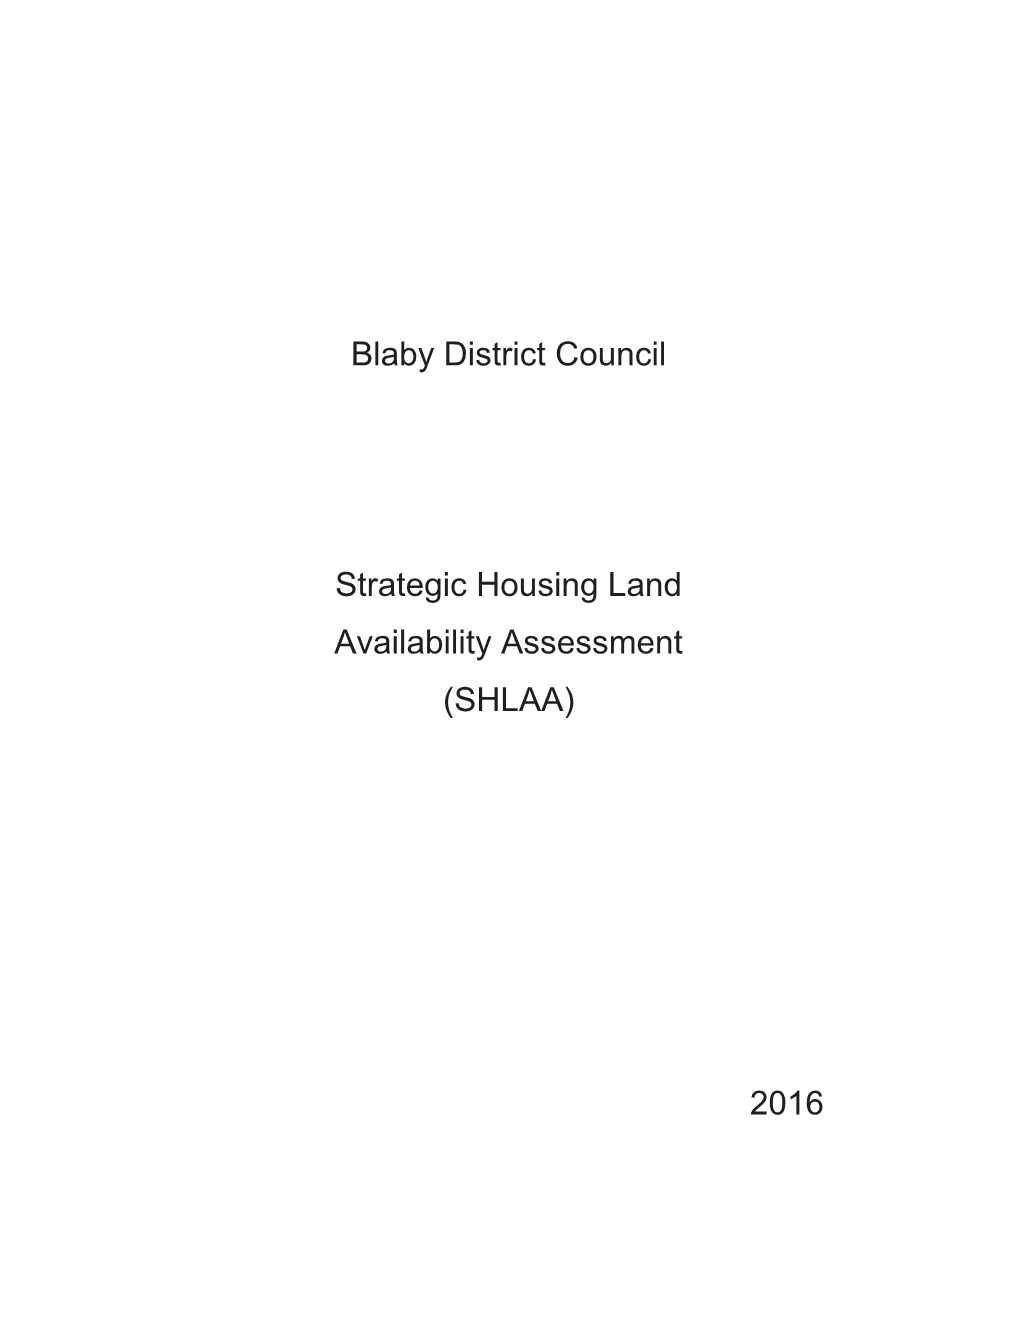 Blaby District Council Strategic Housing